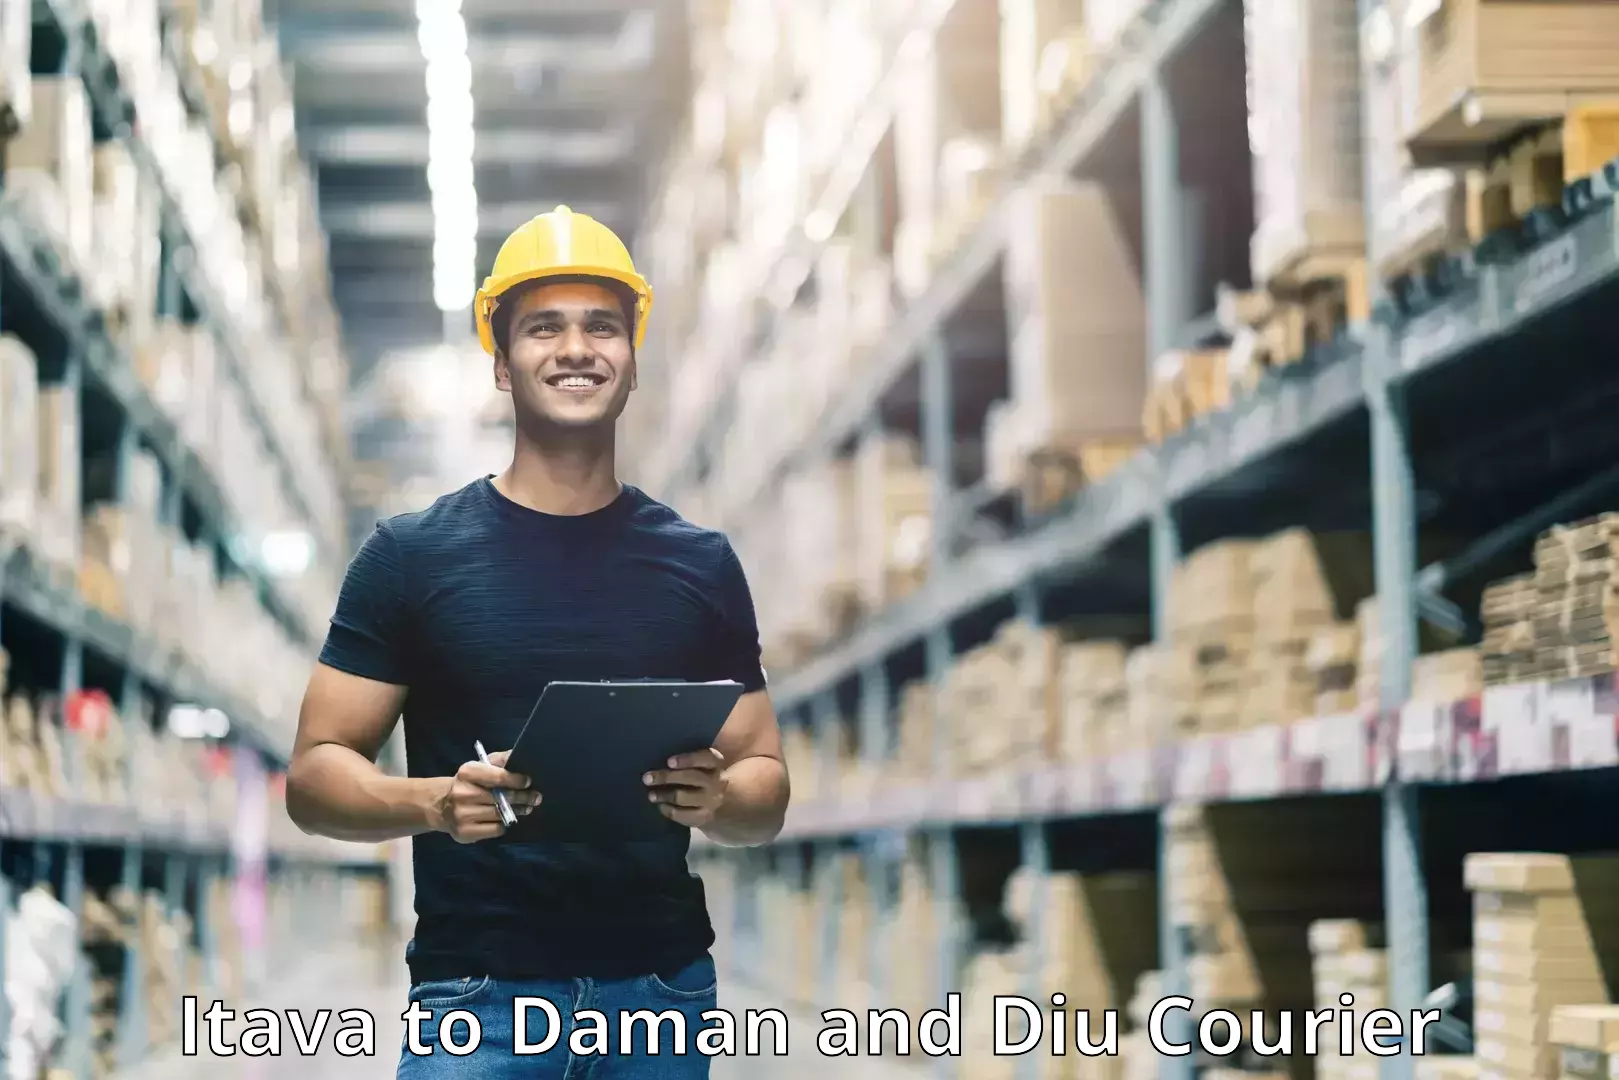 On-demand shipping options Itava to Daman and Diu